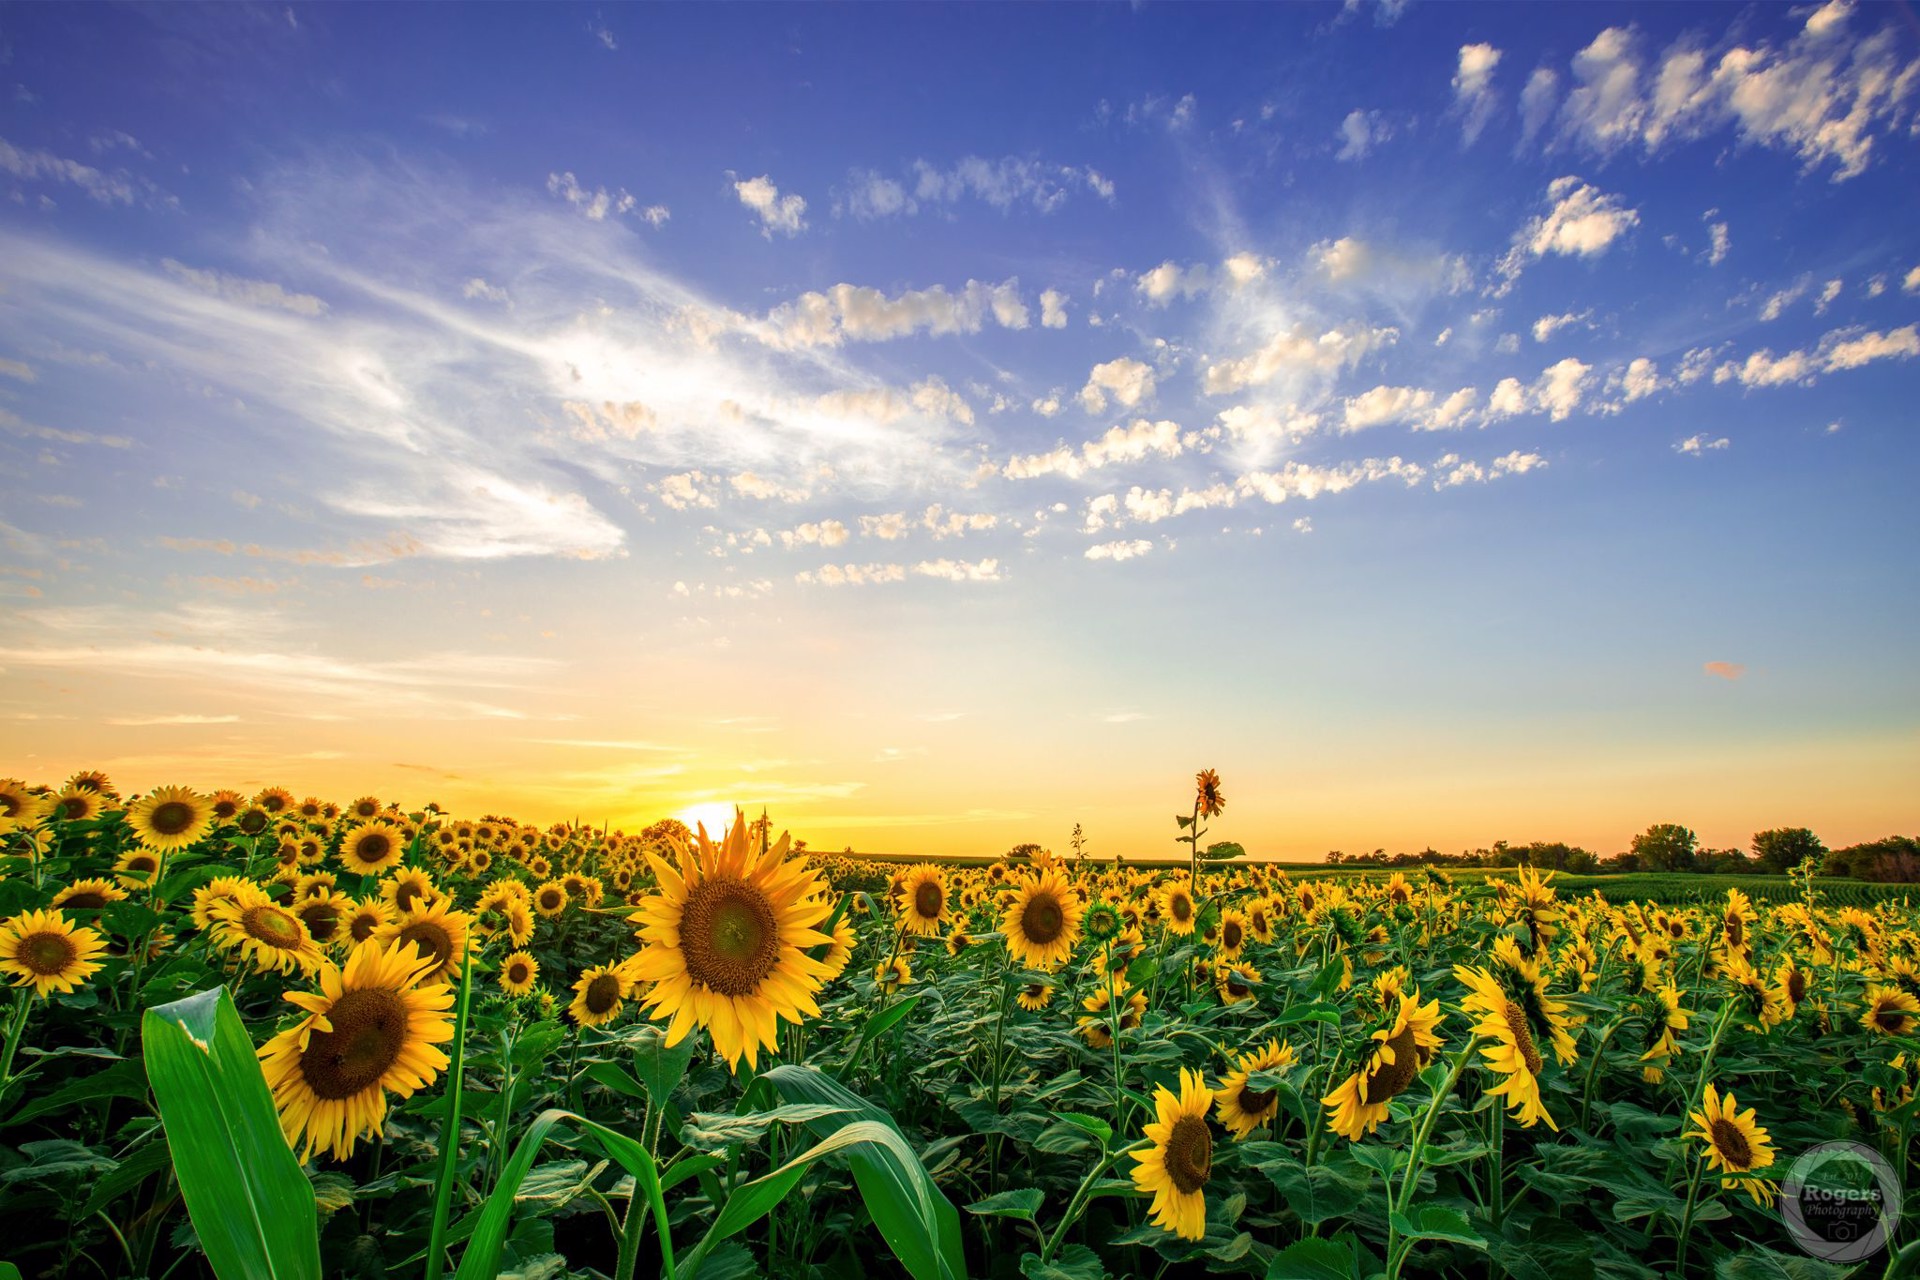 Iowa Sunflowers by Justin Rogers